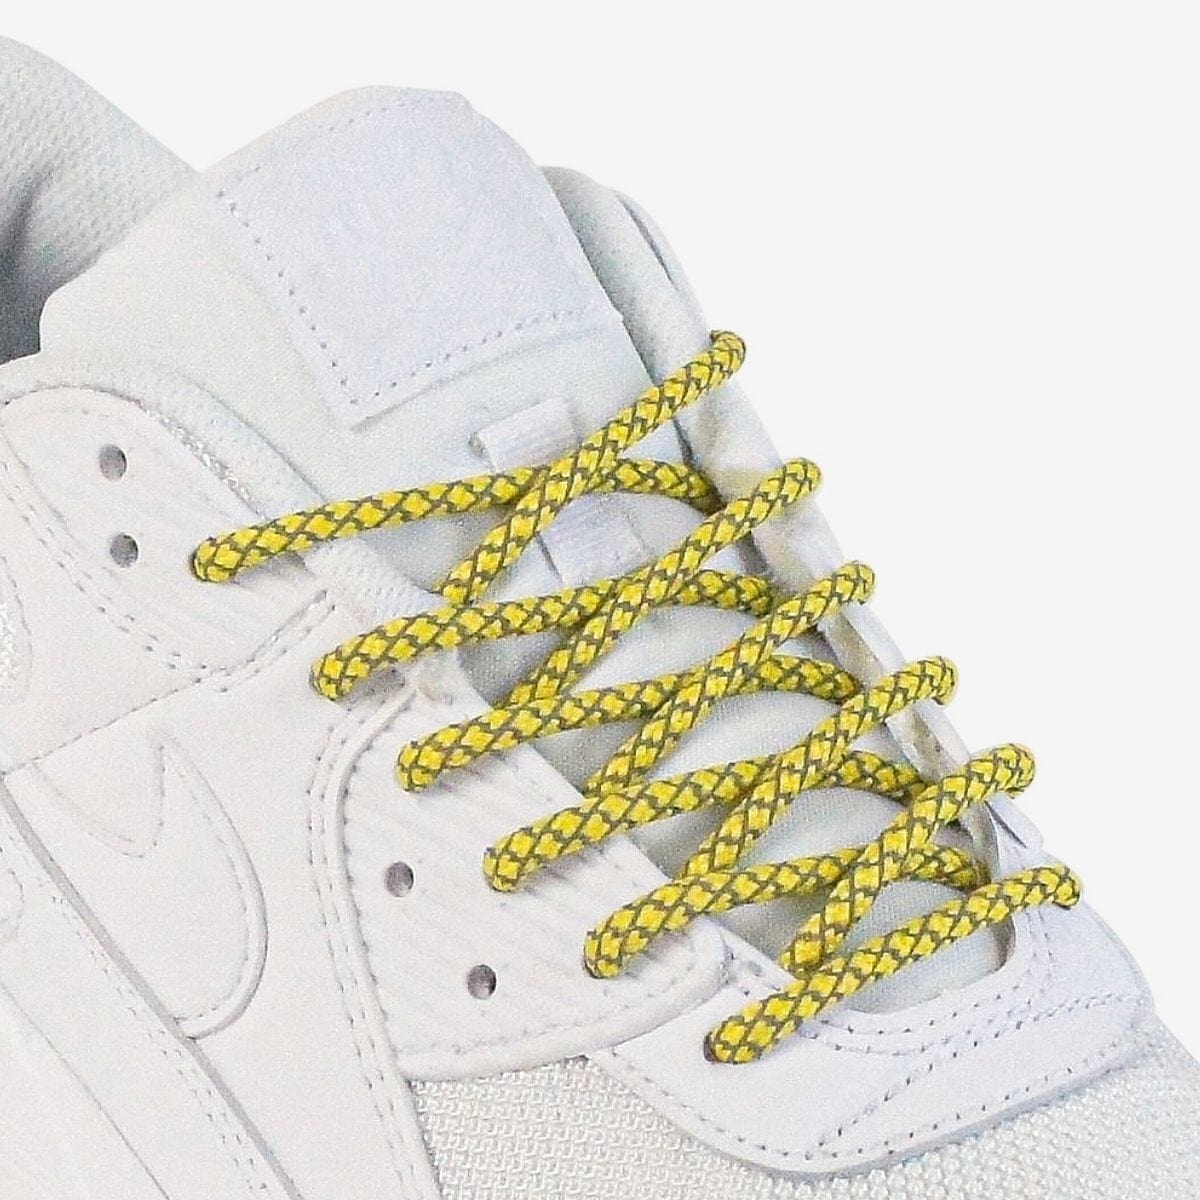 custom-color-shoelaces-on-white-sneakers-with-reflective-yellow-laces